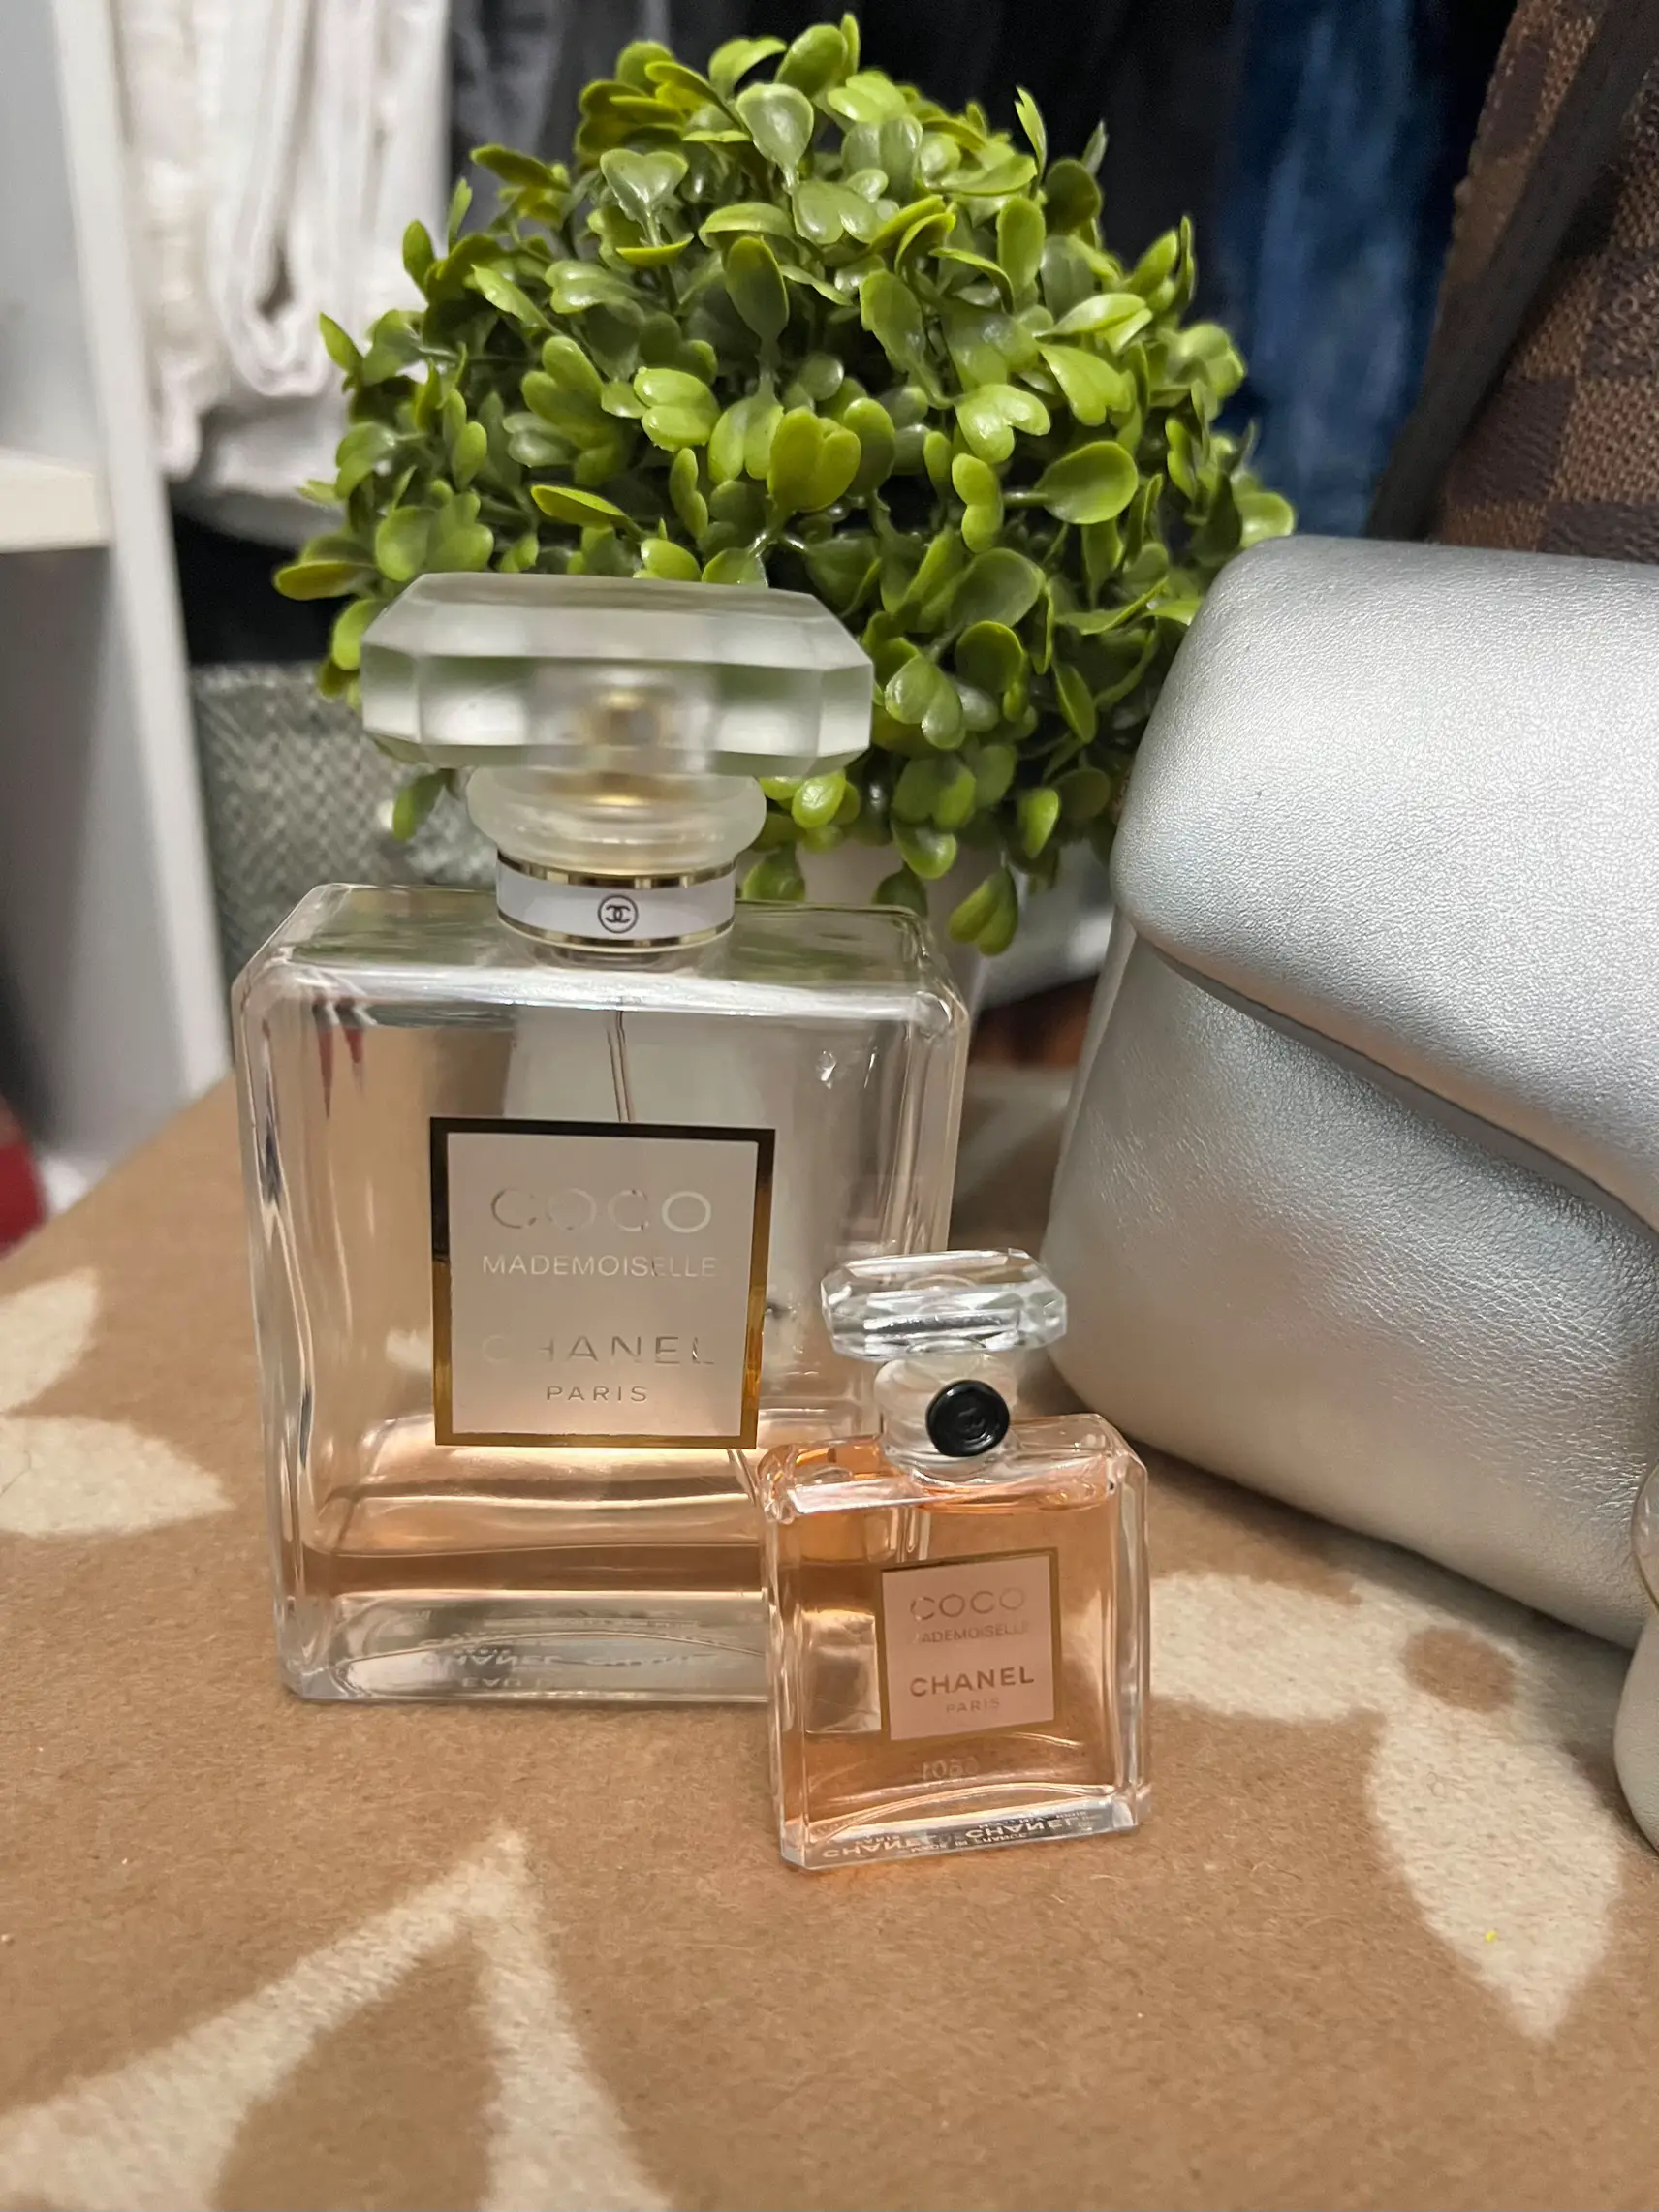 MINI CHANEL PERFUME…$140???? NO WAYYY!, Gallery posted by LovelyLyneice